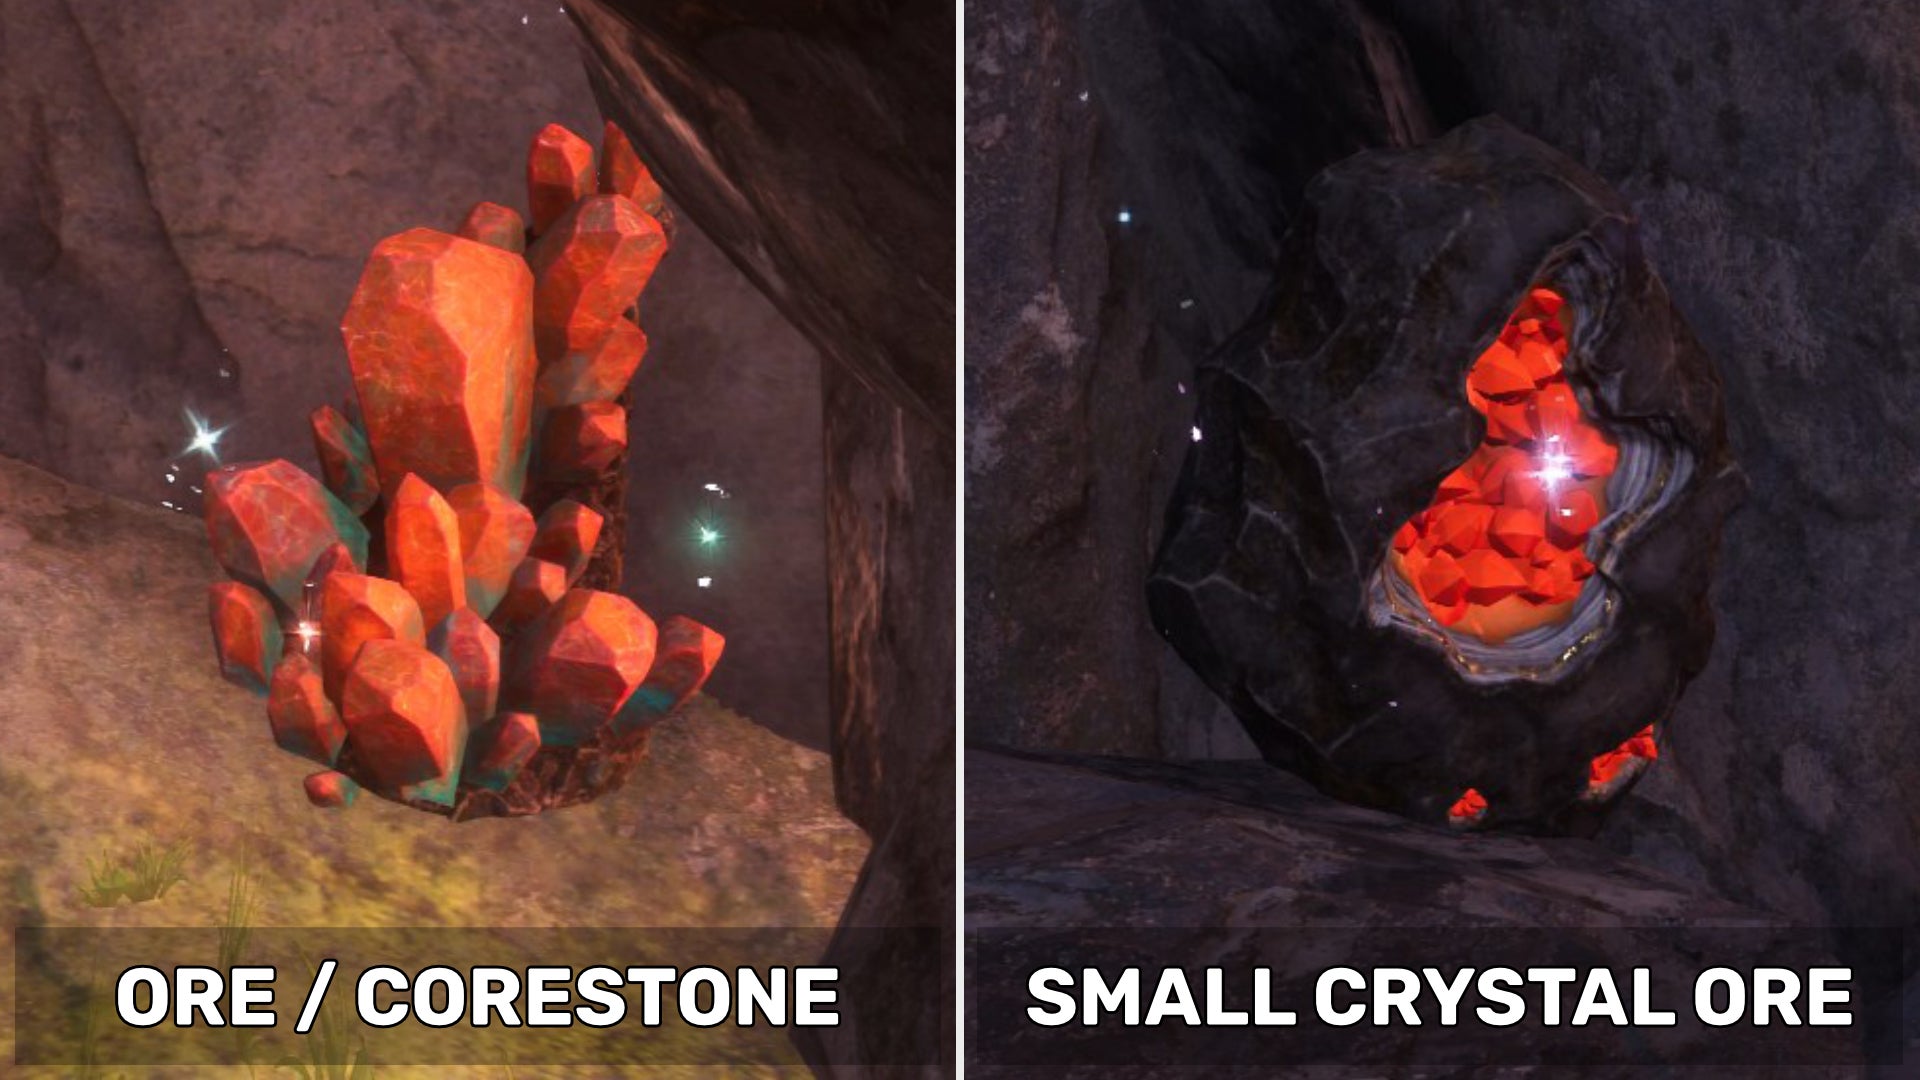 Two types of ore collectible in Wild Hearts. Left: a spiky orange ore outcrop from which you can get Ore or Corestone. Right: a smoother rock from which you can get Small Crystal Ore.